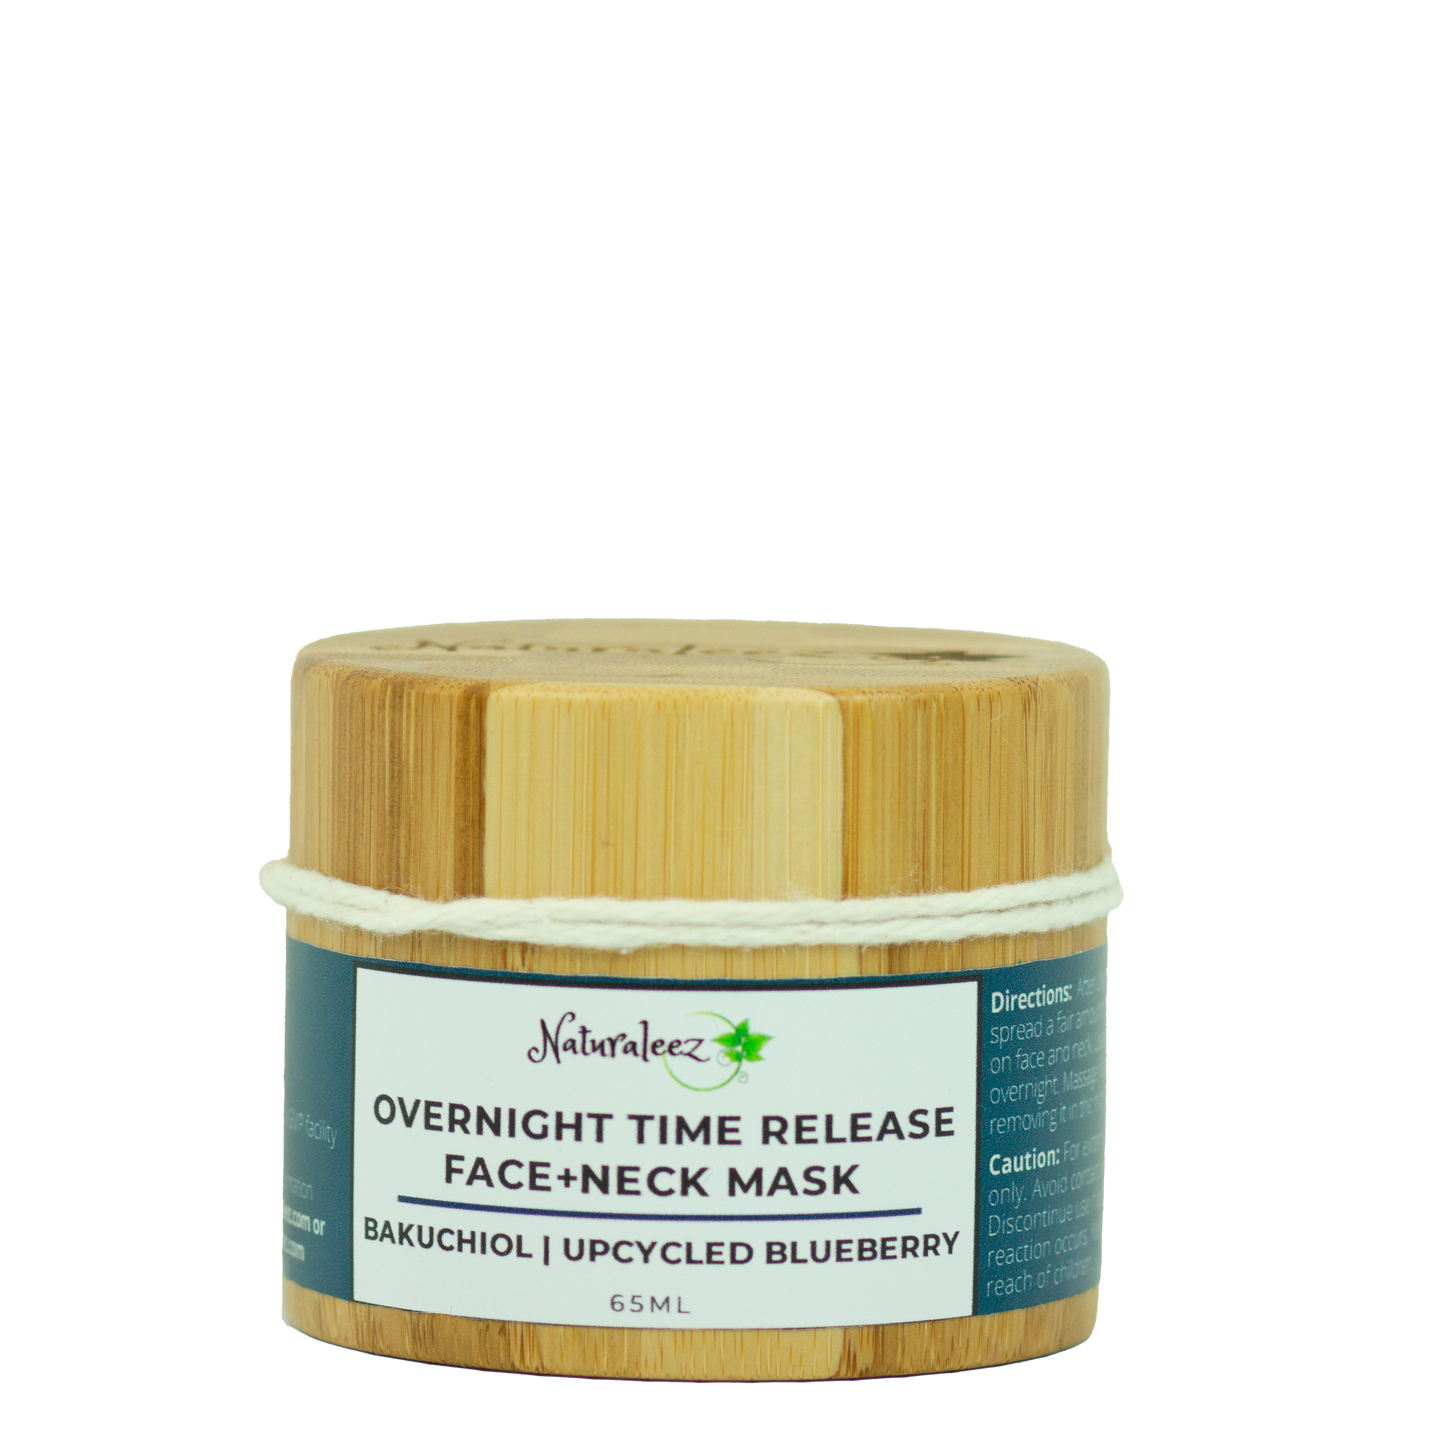 Naturaleez - Overnight Time Release Face + Neck Mask